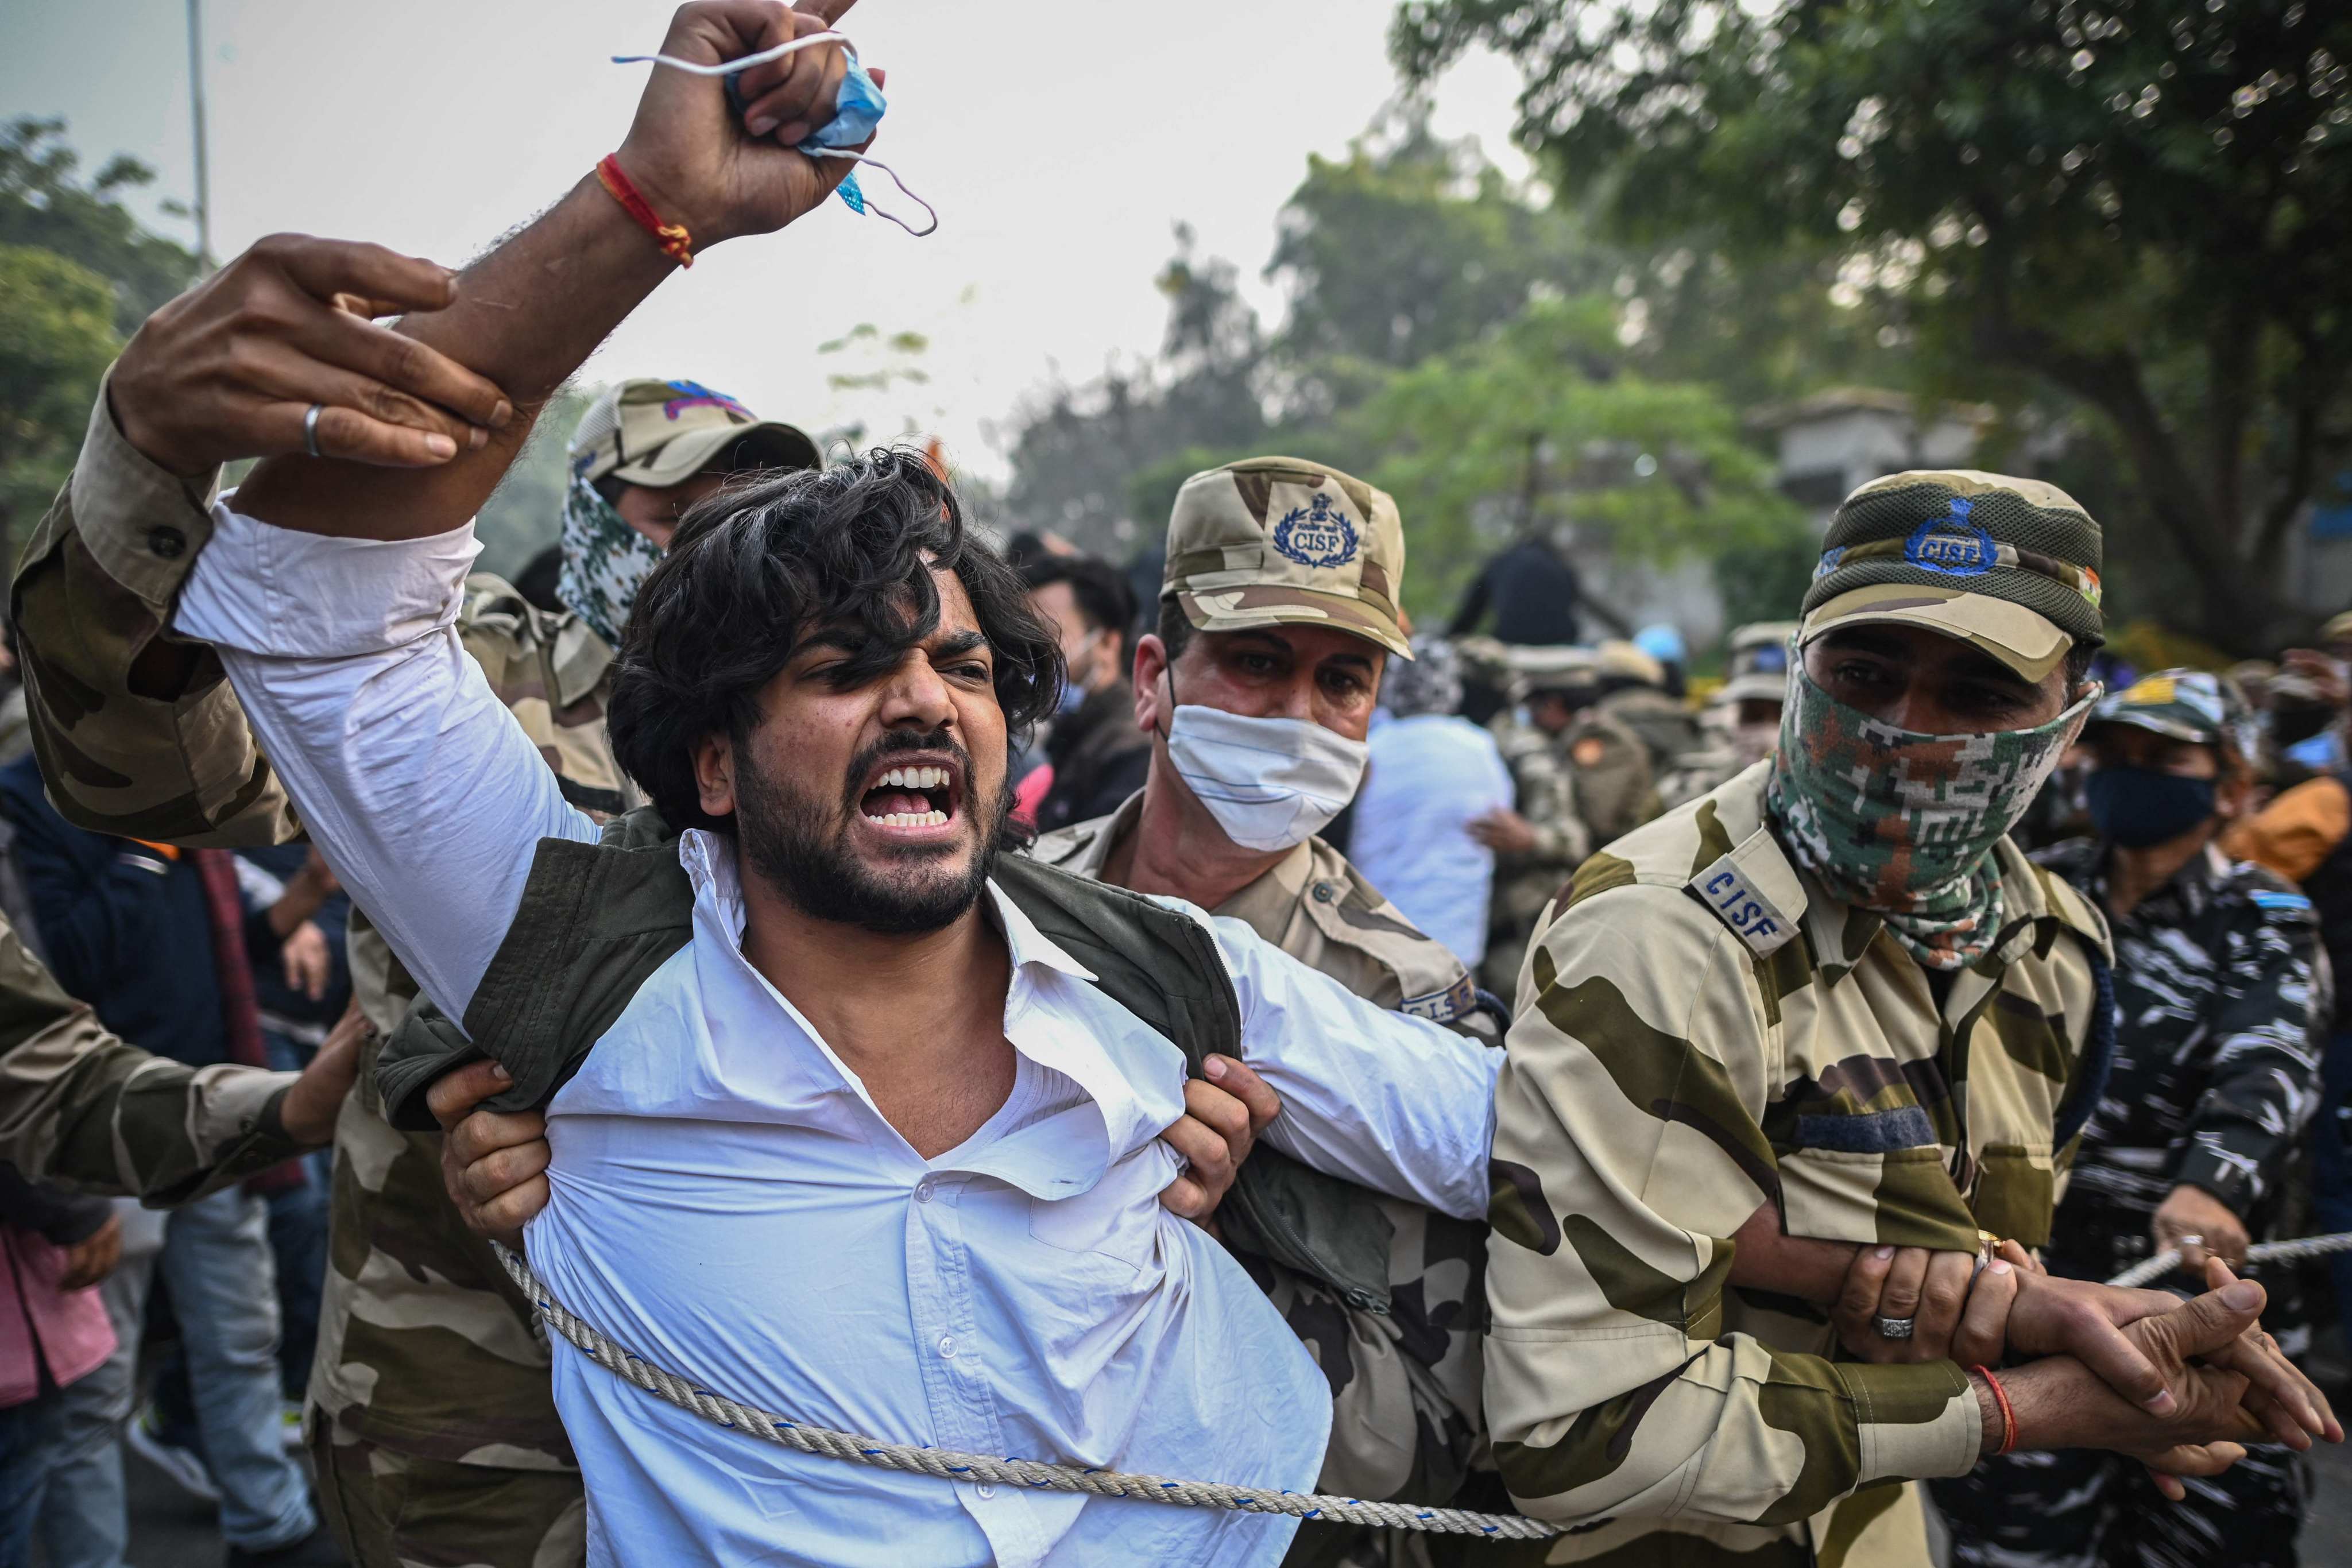 Indian police detain an activist from the pro-Hindu Bharatiya Janata Party (BJP) during a demonstration in New Delhi on Monday. It demanded justice for a Hindu girl who it is claimed died by suicide in Tamil Nadu state after coming under pressure to become a Christian. Photo: AFP